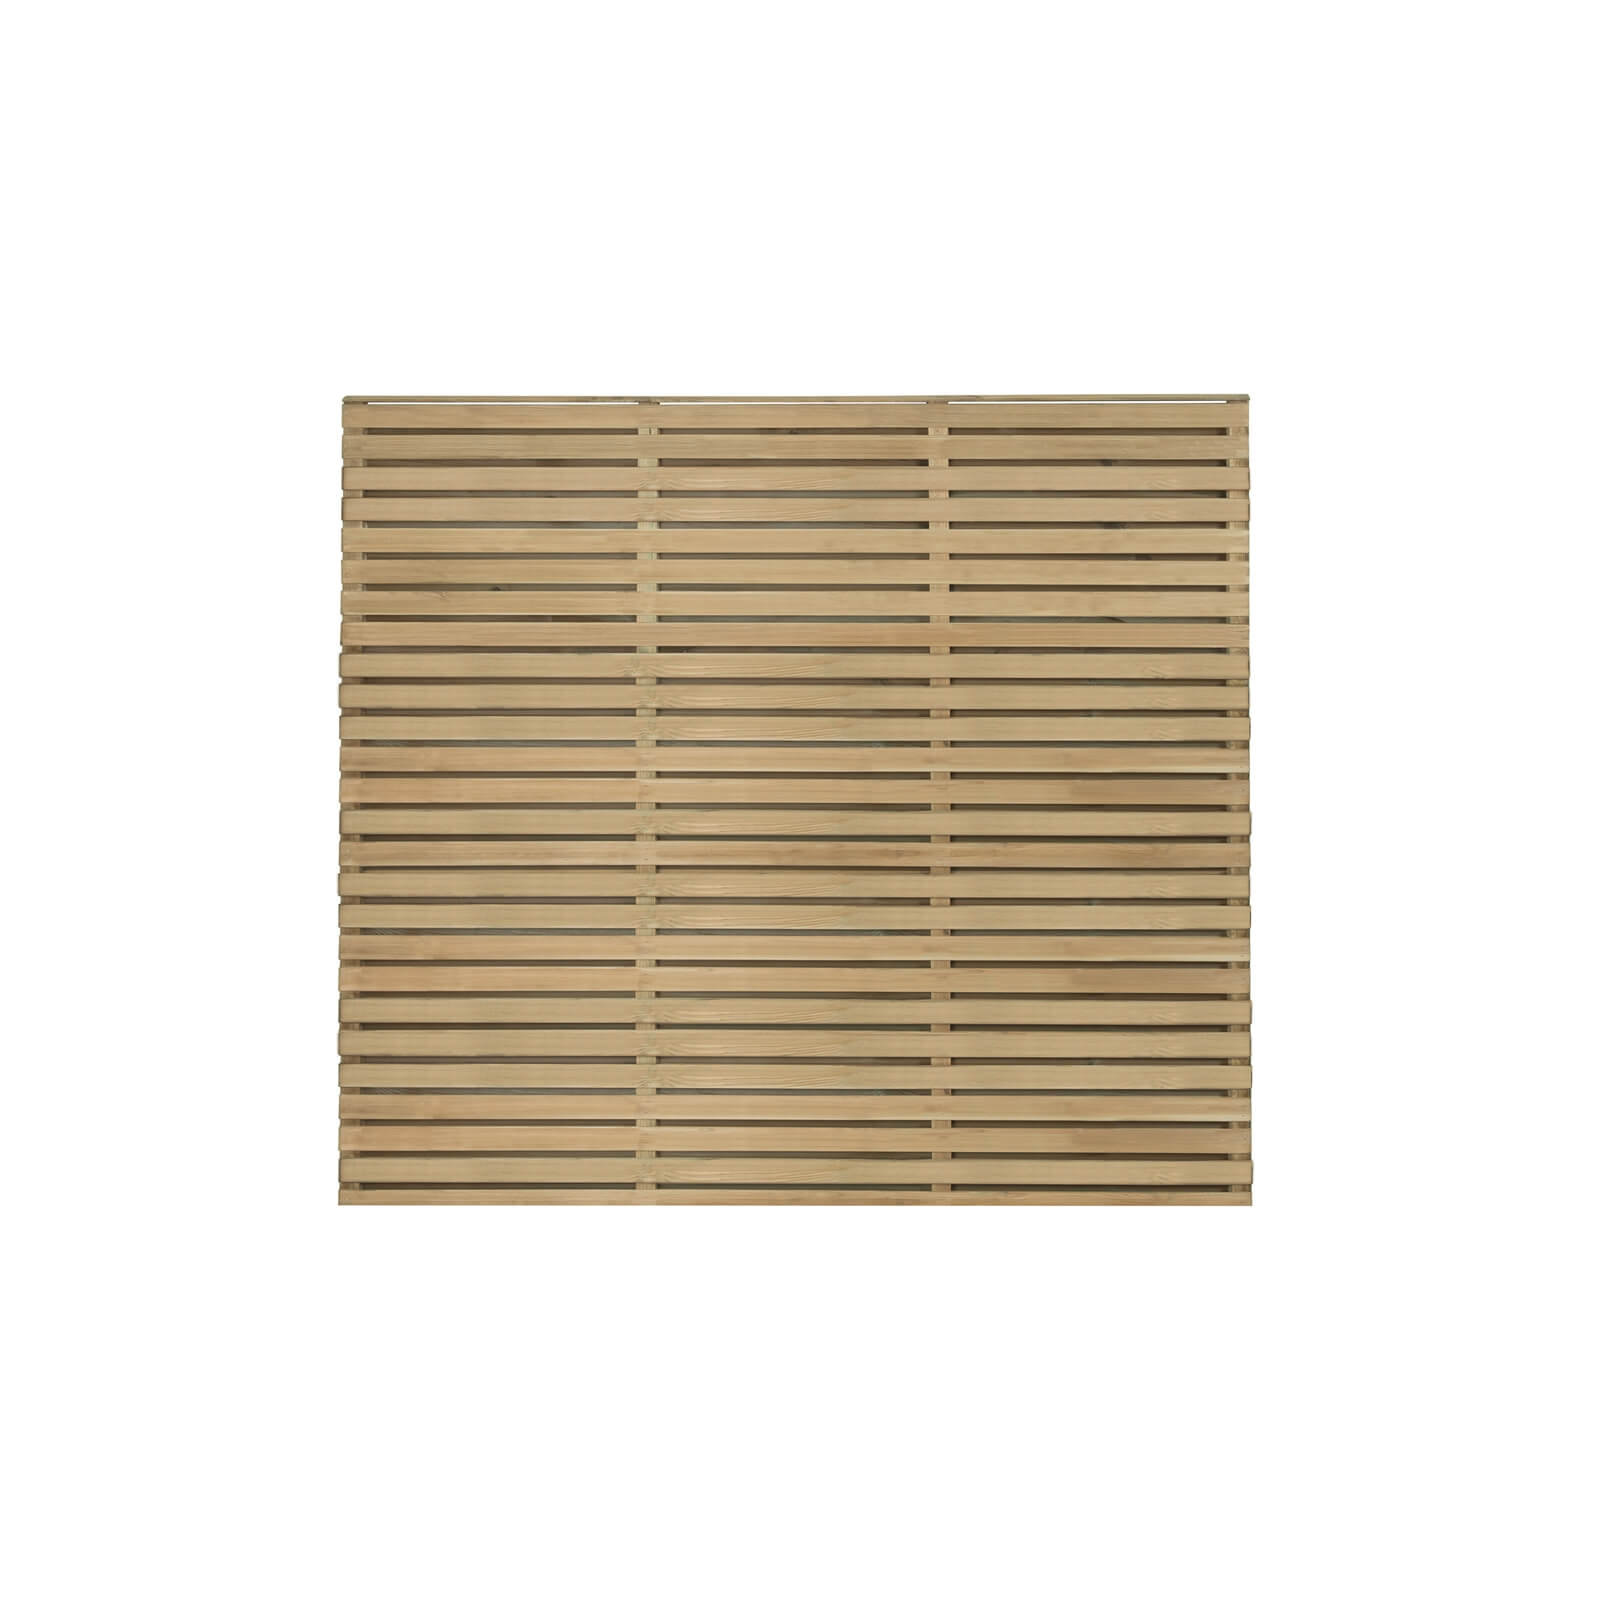 6ft x 5ft (1.8m x 1.5m) Pressure Treated Contemporary Double Slatted Fence Panel - Pack of 5